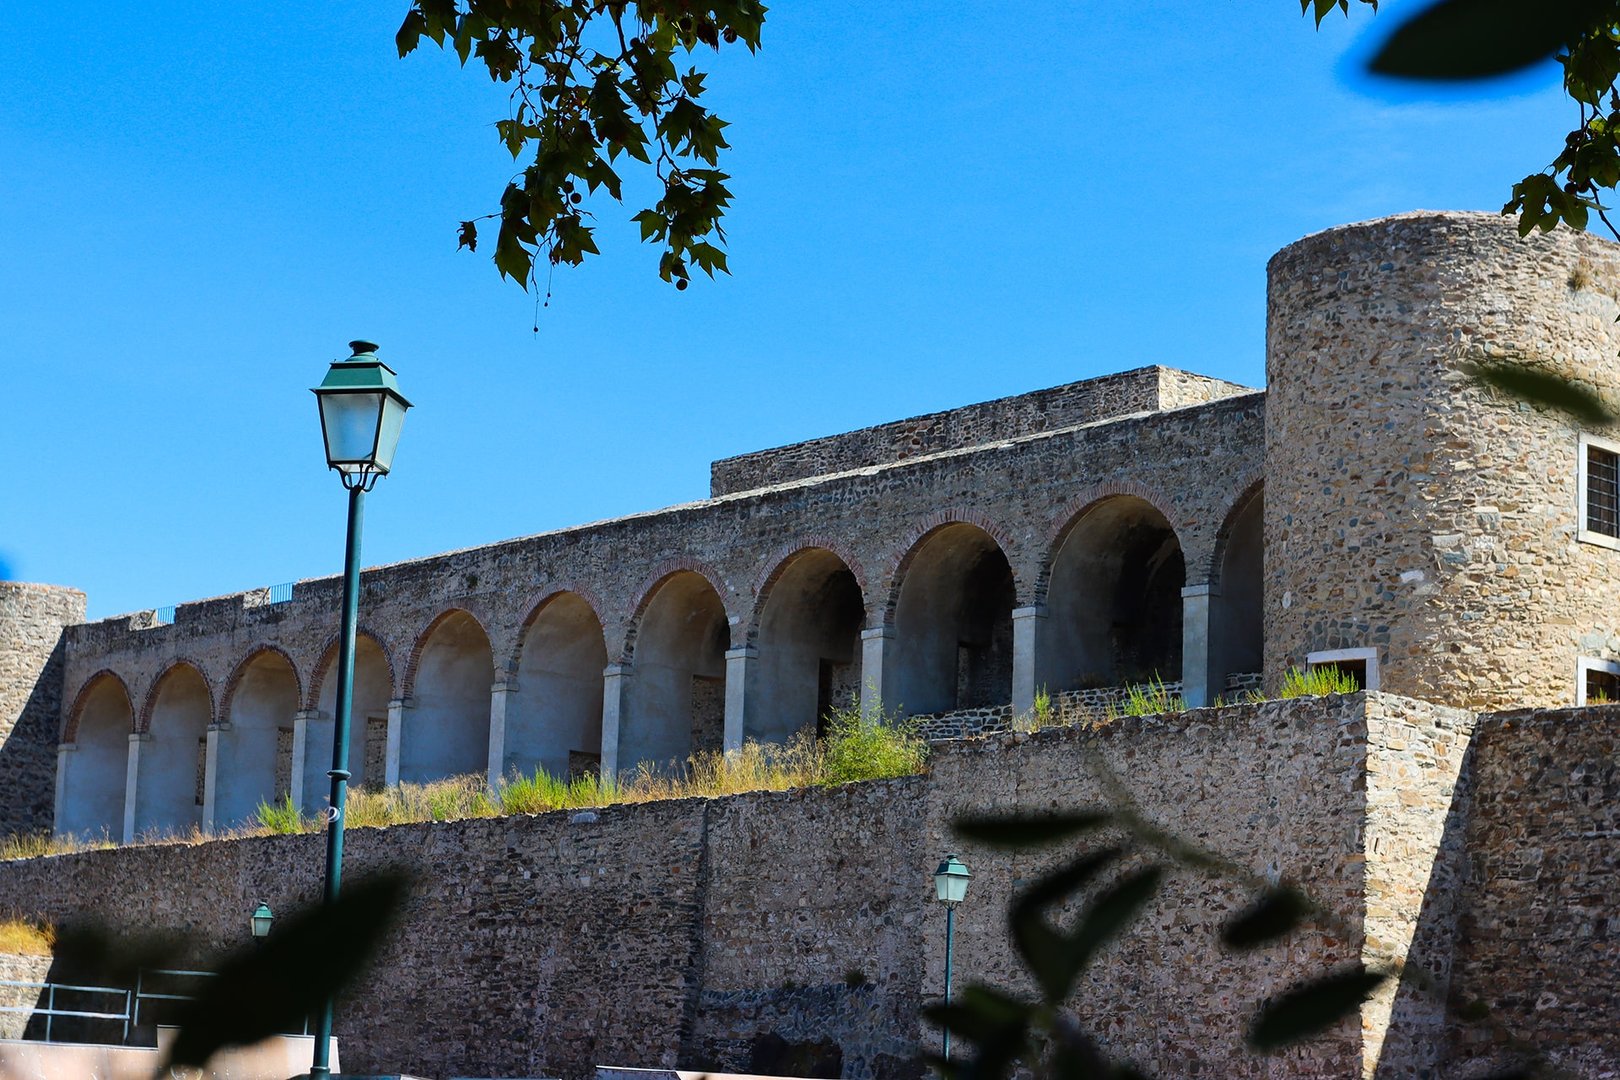 Detail of the arches that embellished the Palace of the Marquis of Abrantes